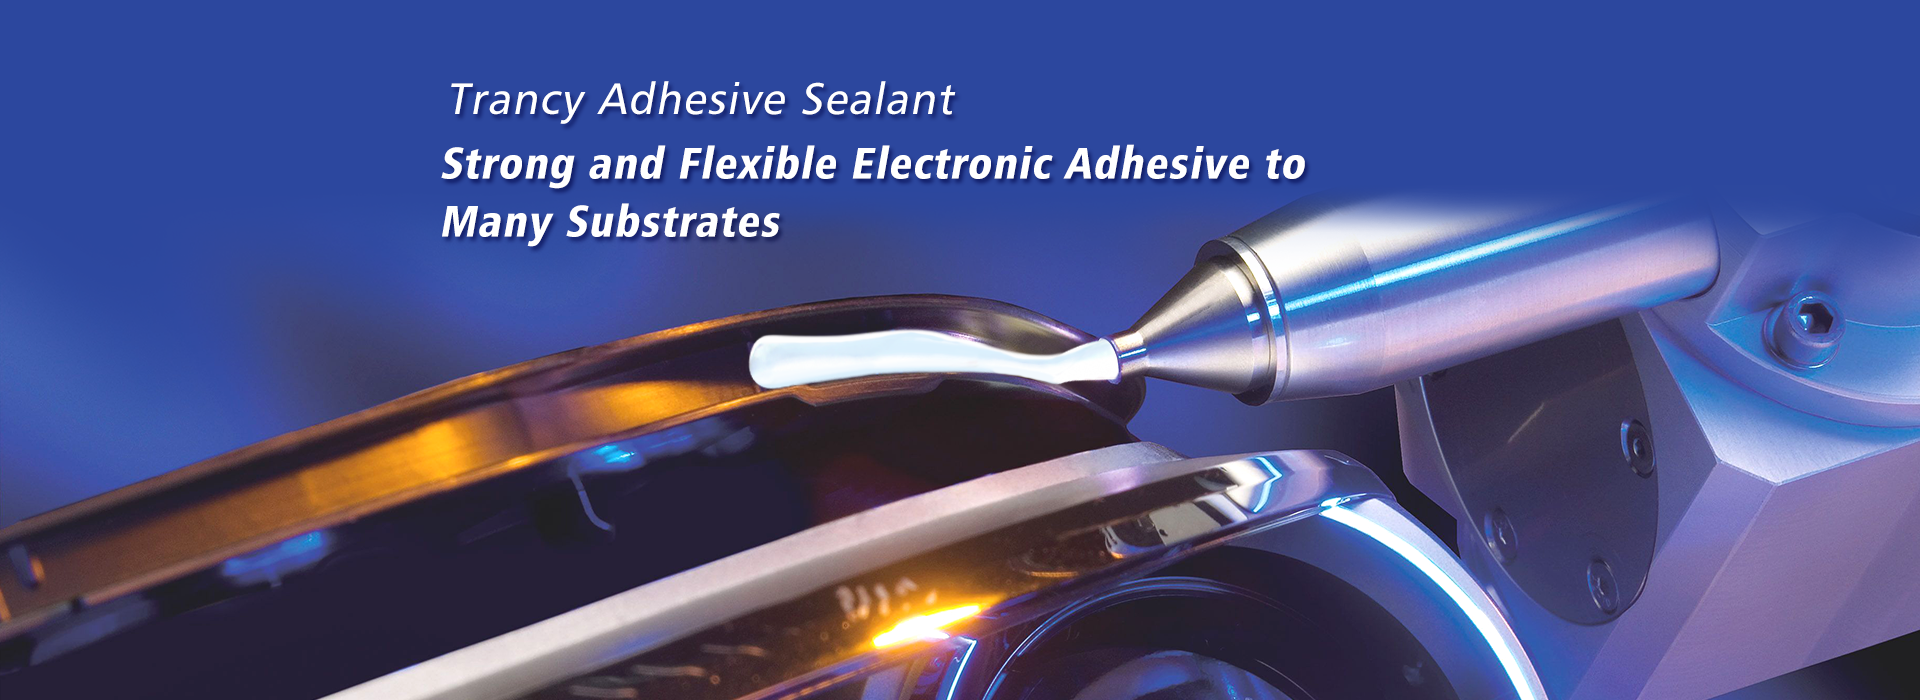 Silicone adhesive sealant offers strong but flexible adhesives to auto lights.